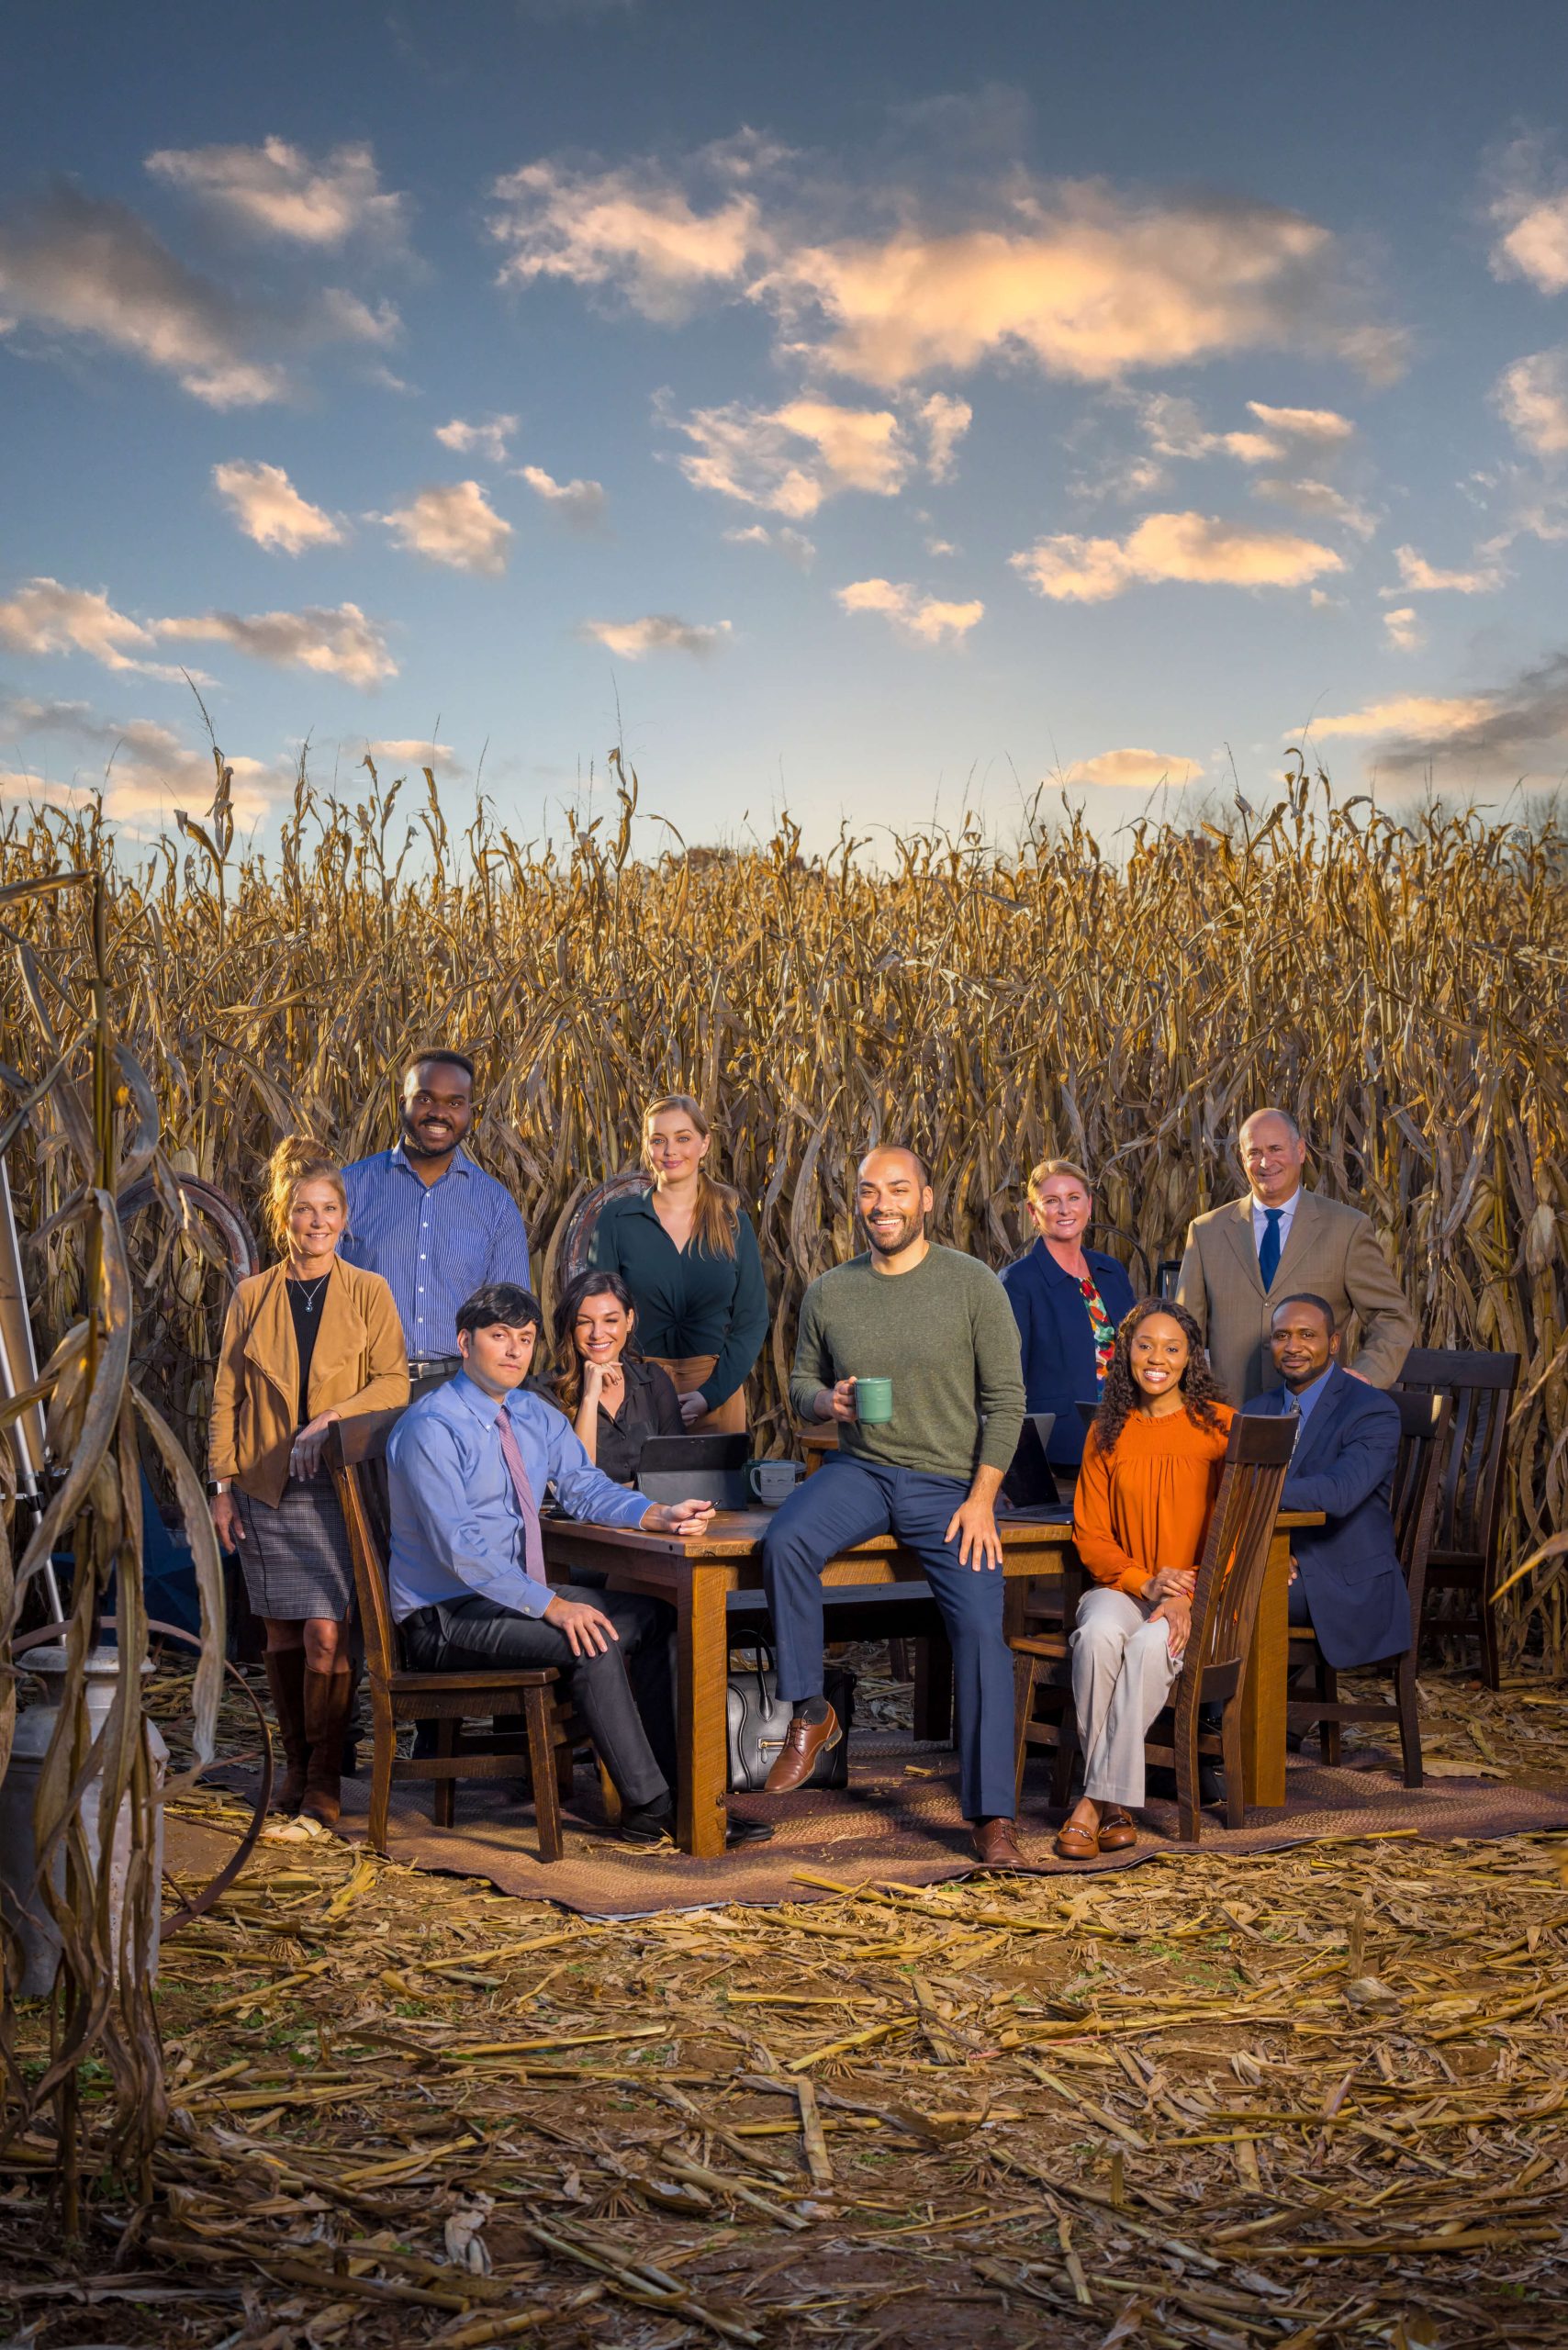 businessmen and women at conference table in cornfield